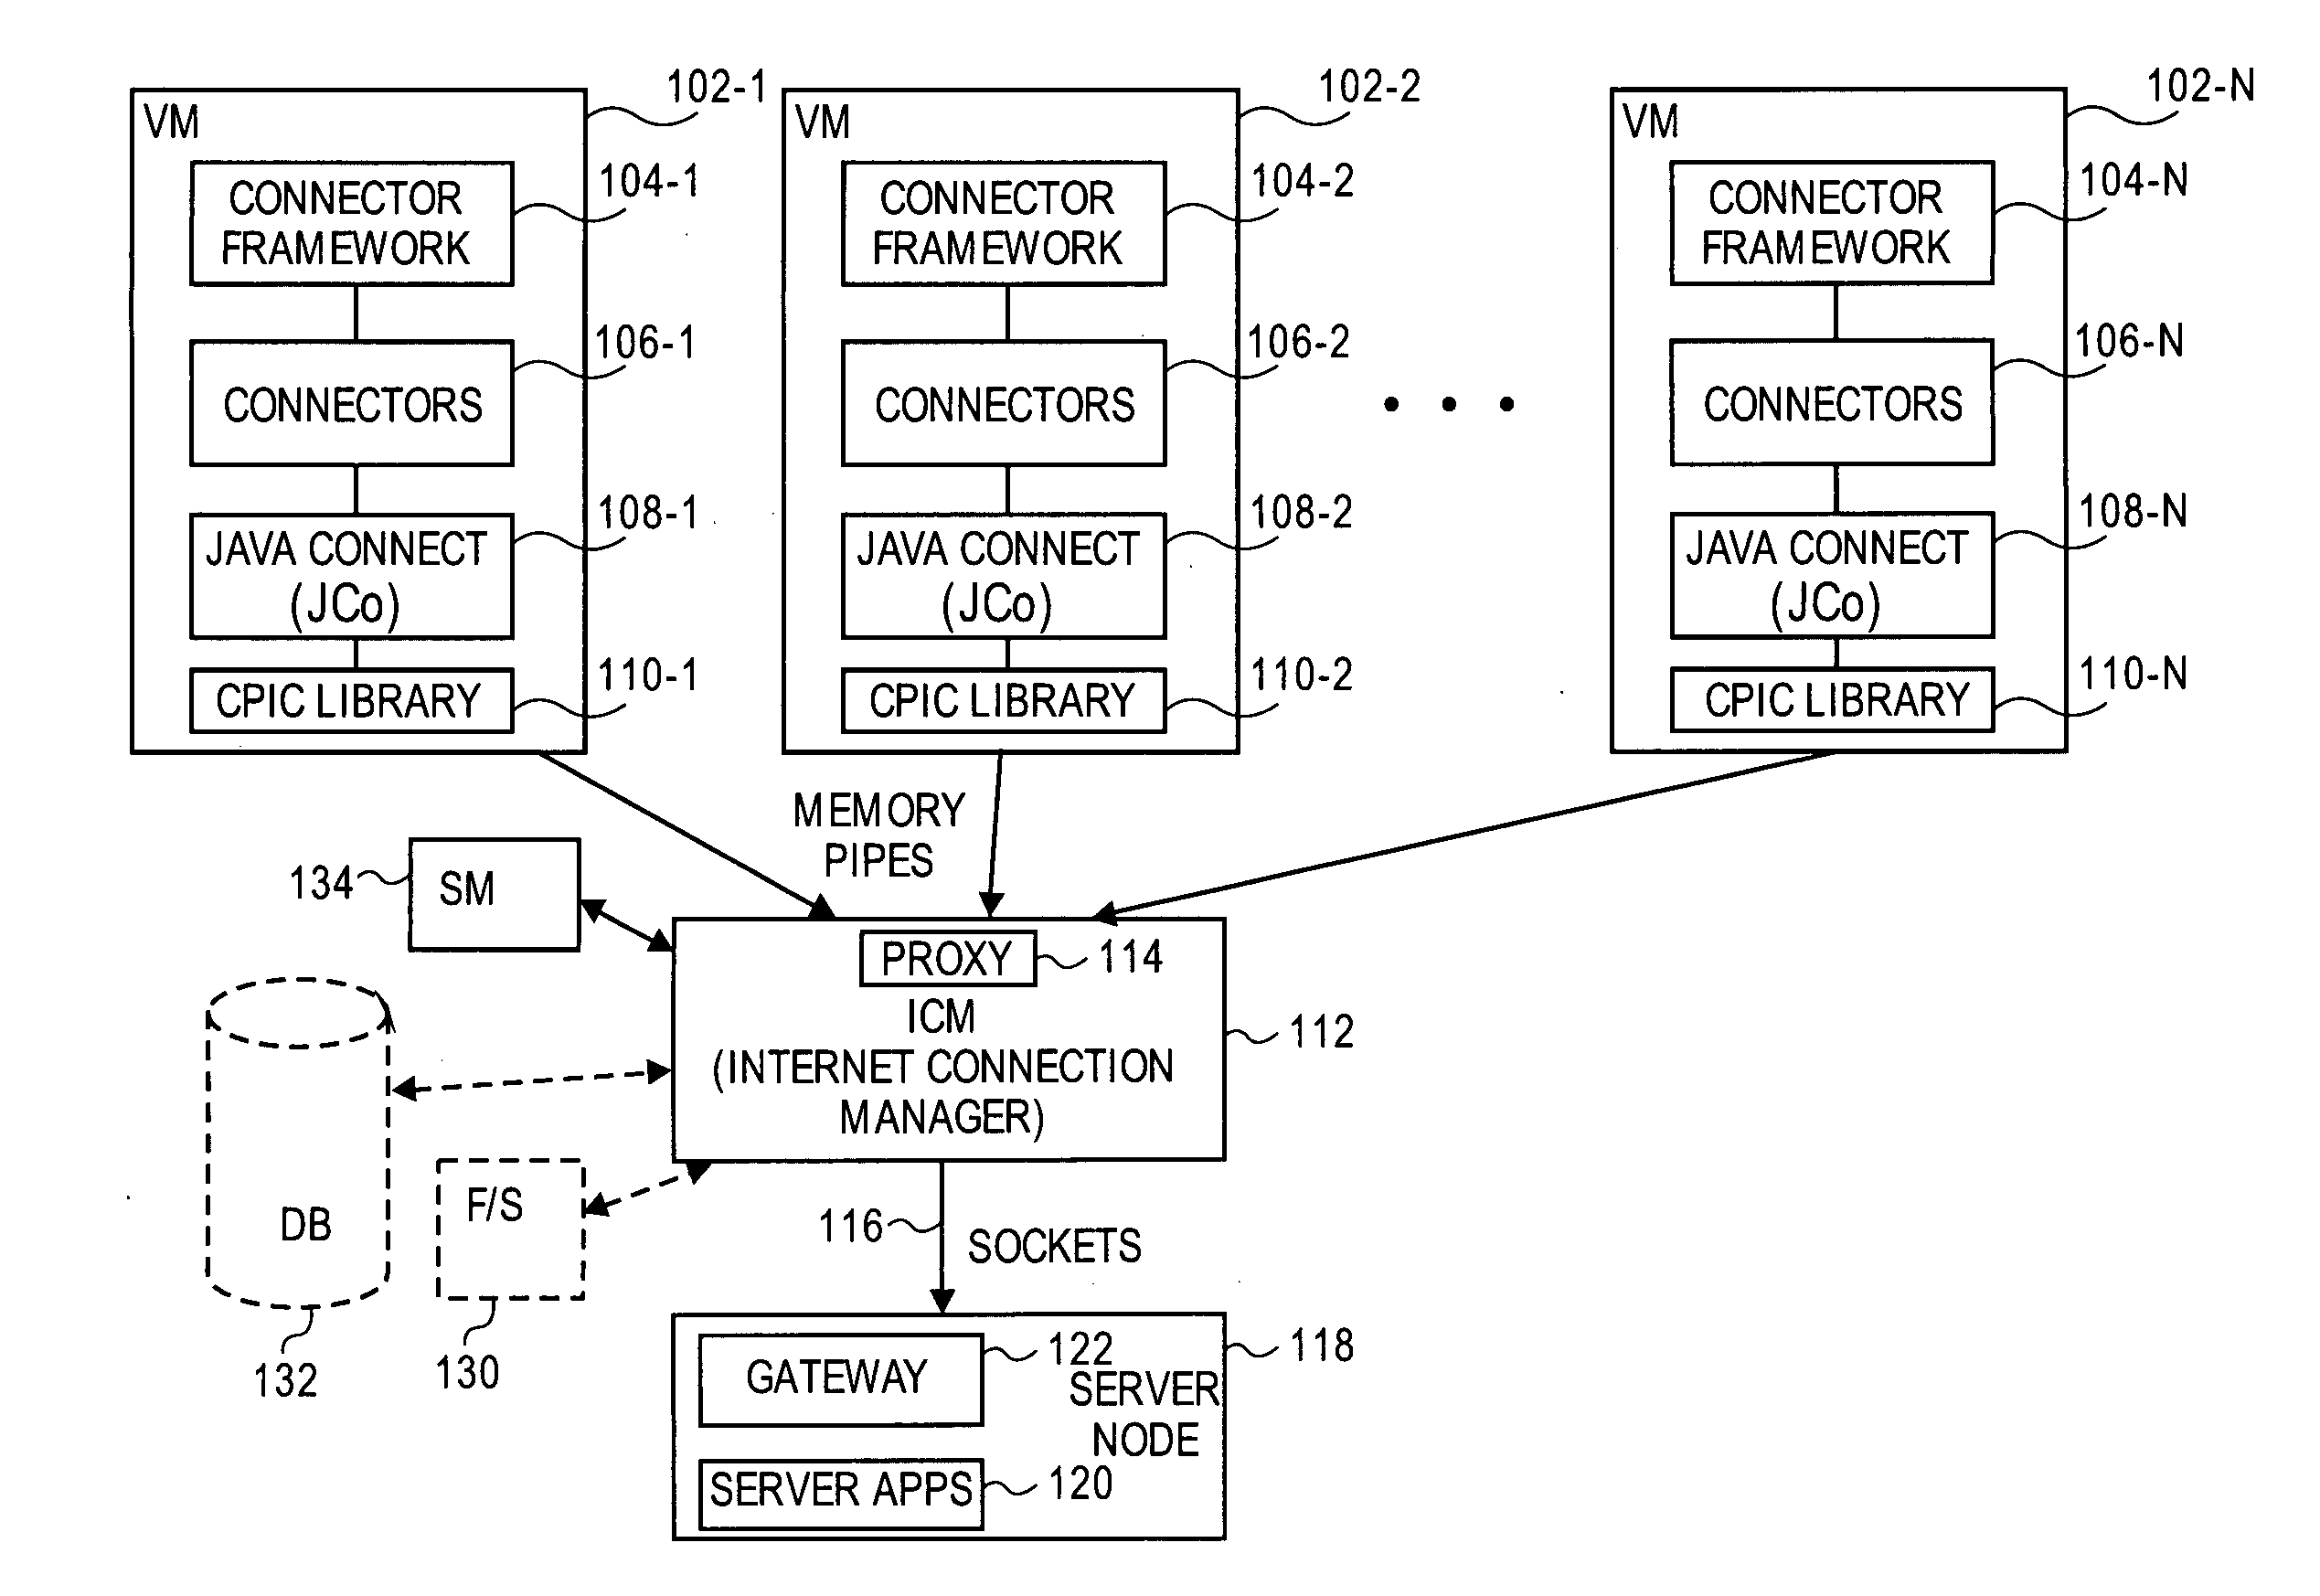 Virtualization and high availability of network connections